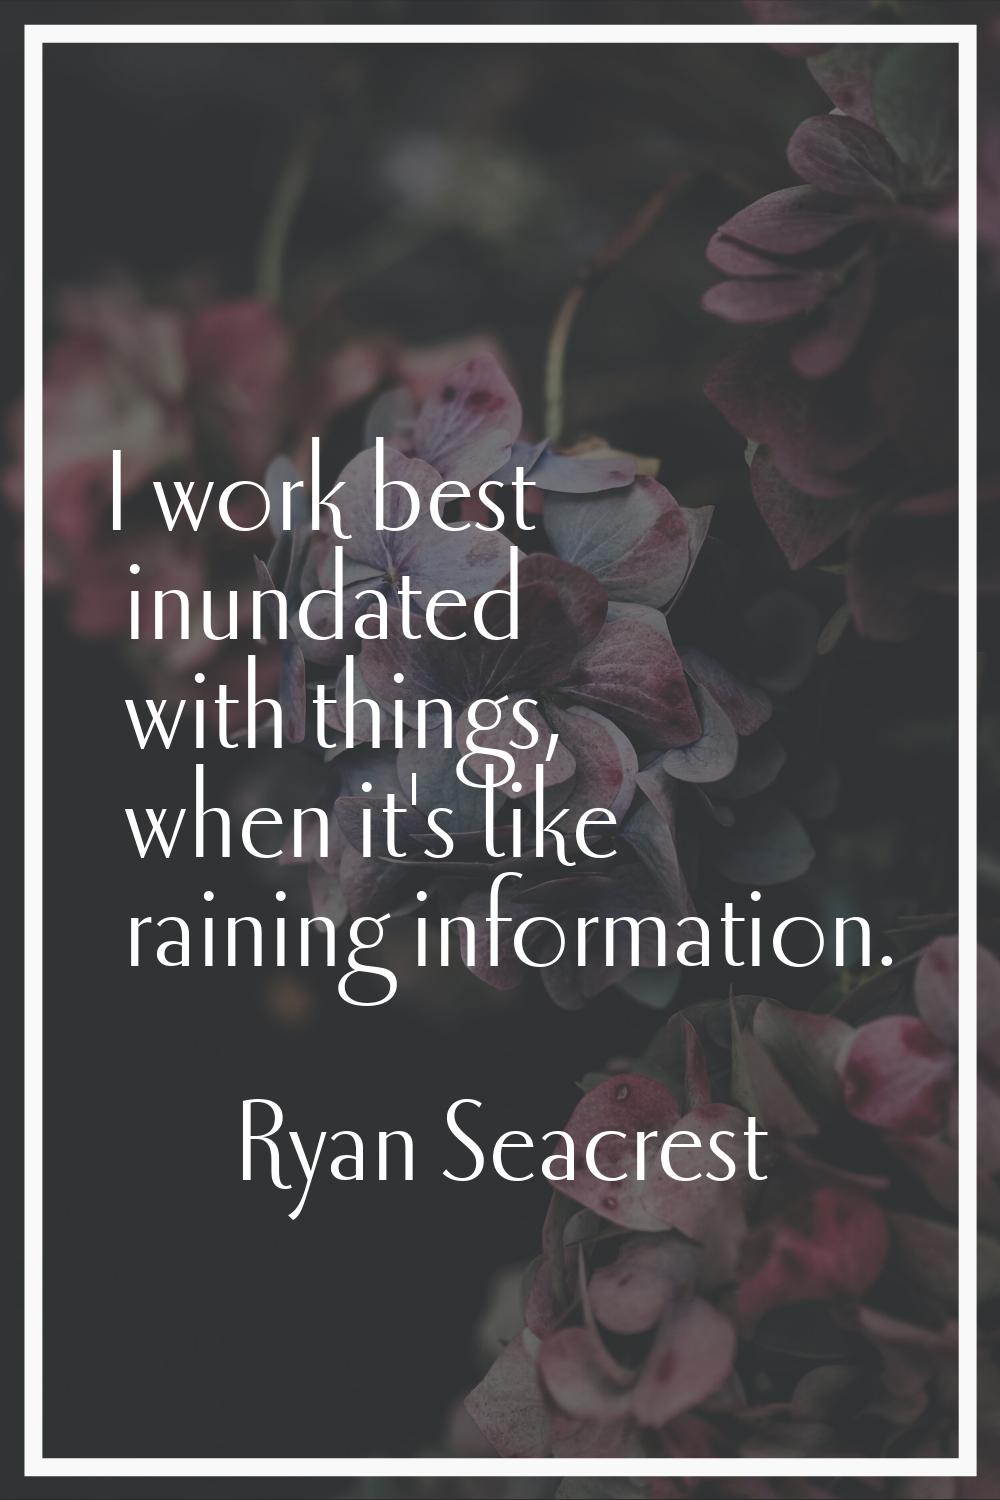 I work best inundated with things, when it's like raining information.